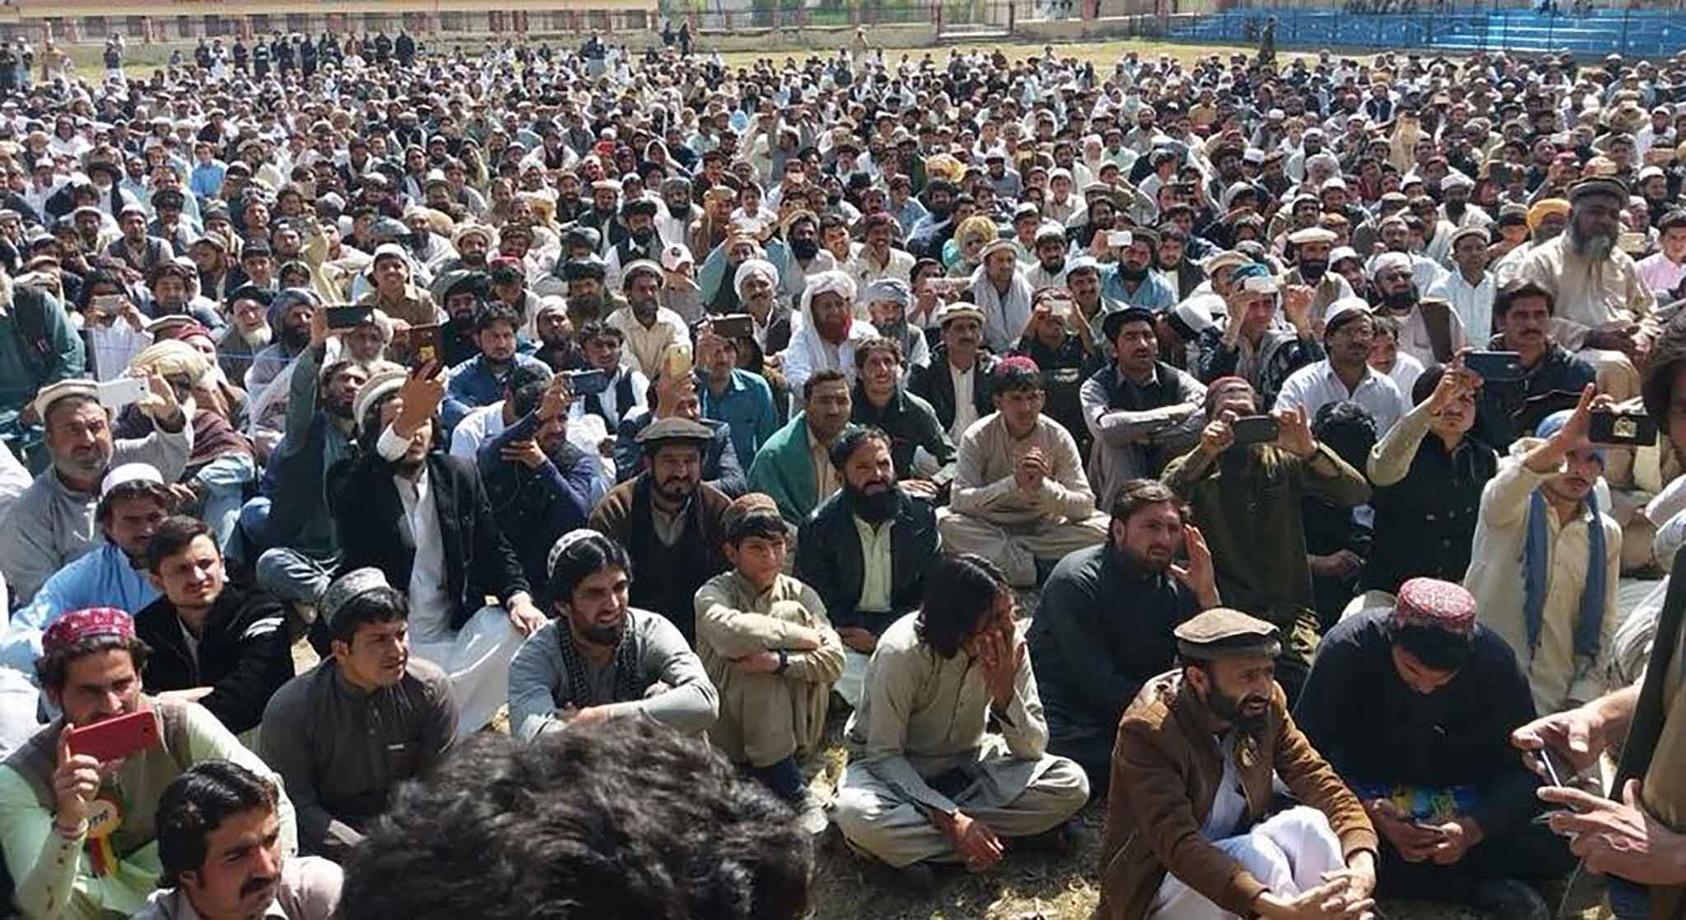 In March, hundreds of Pashtun men attended a protest at the North Waziristan town of Mir Ali, one of dozens of rallies since January. (RFE-RL)